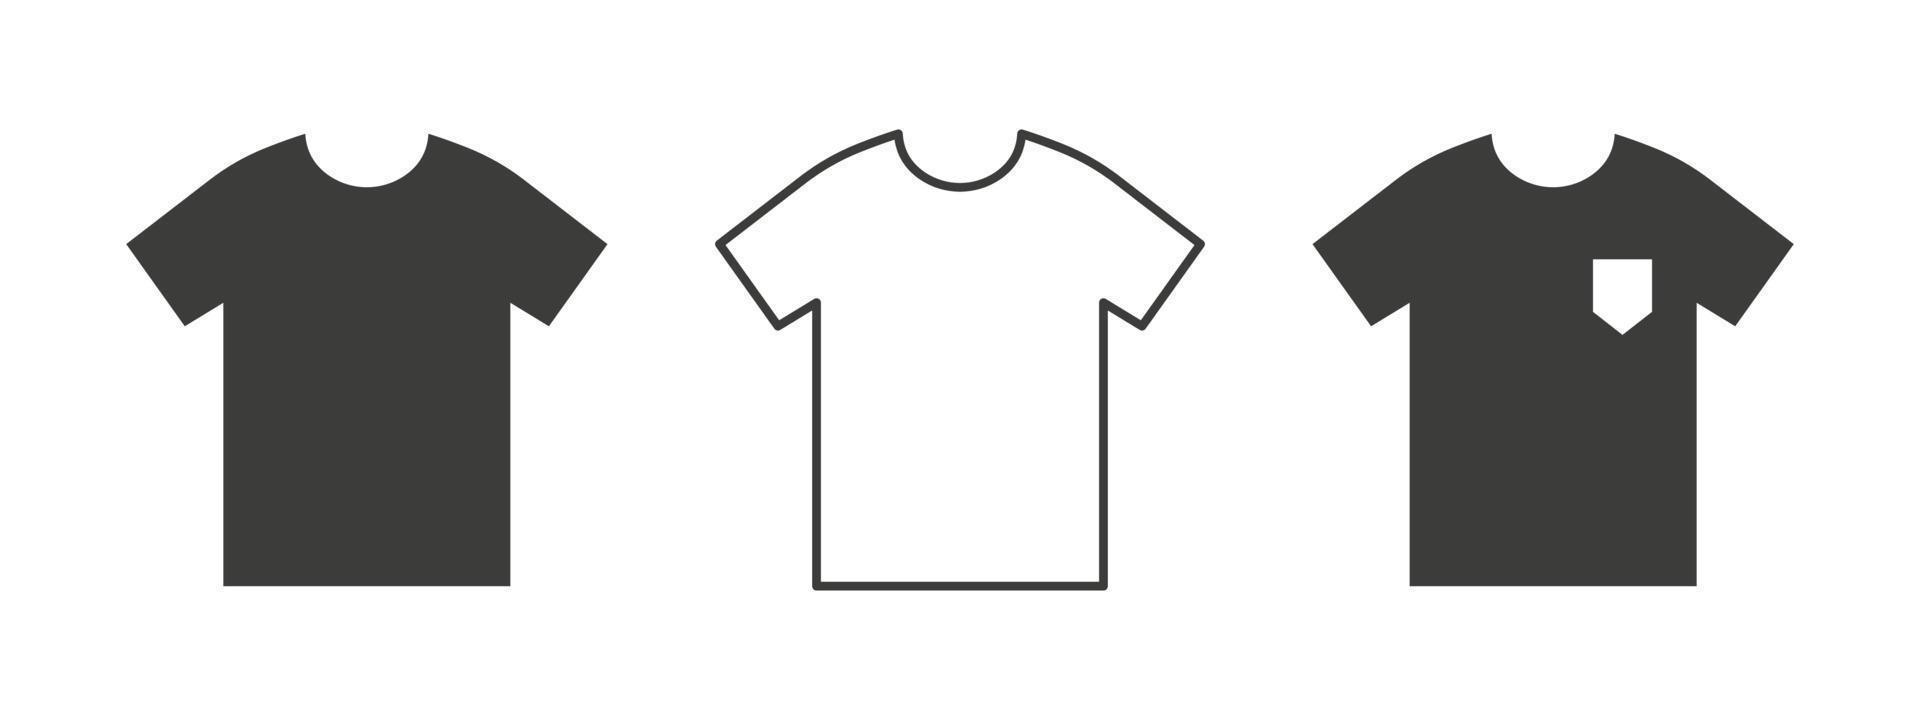 T-shirts icon. Oversized T-shirt. Clothes icons modern style. Vector illustration